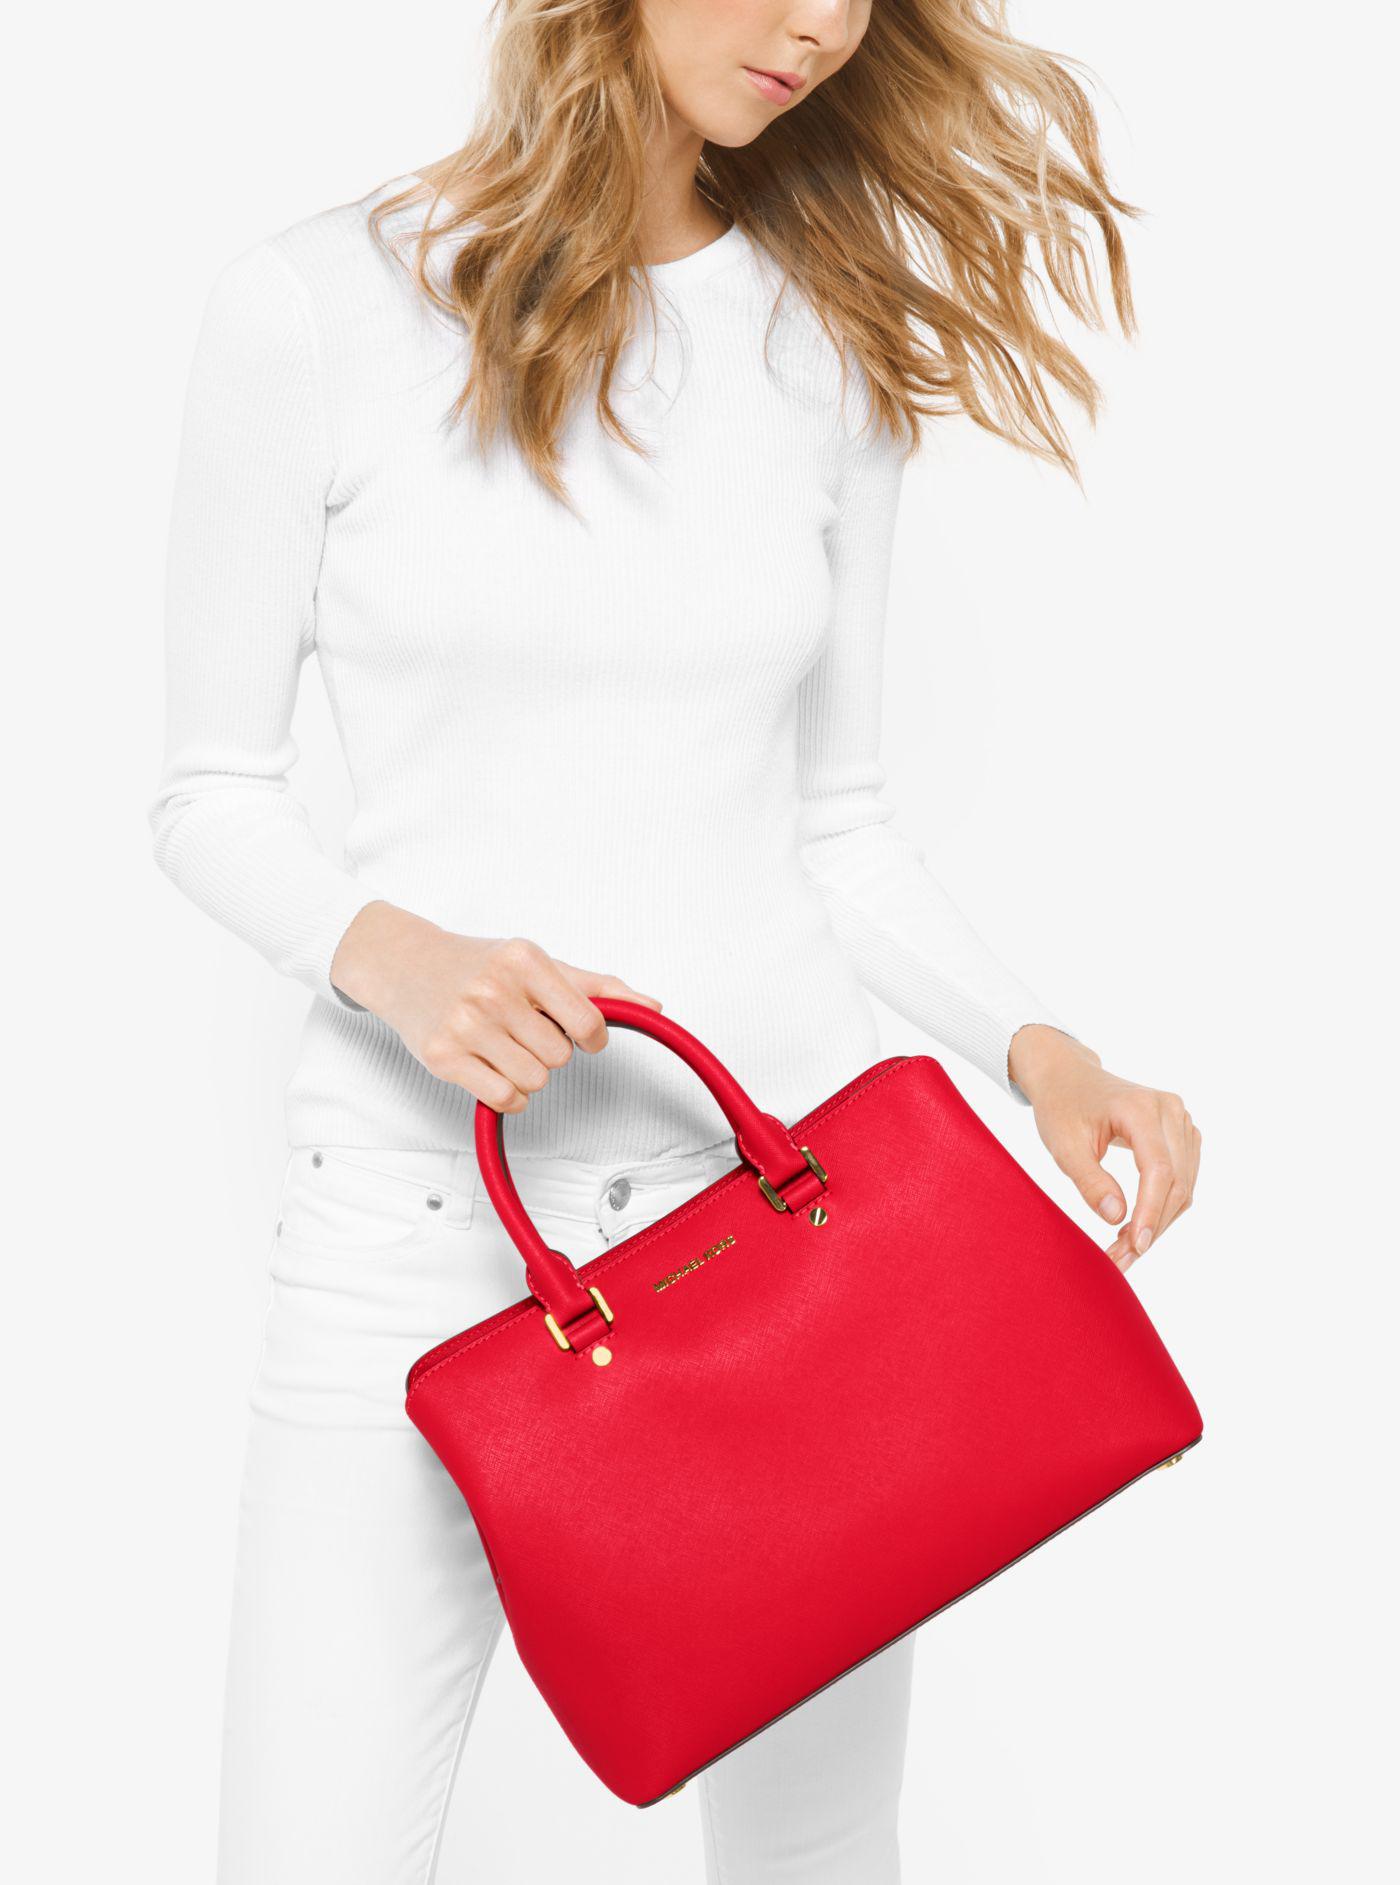 Michael Kors Savannah Large Saffiano Leather Satchel in Red | Lyst